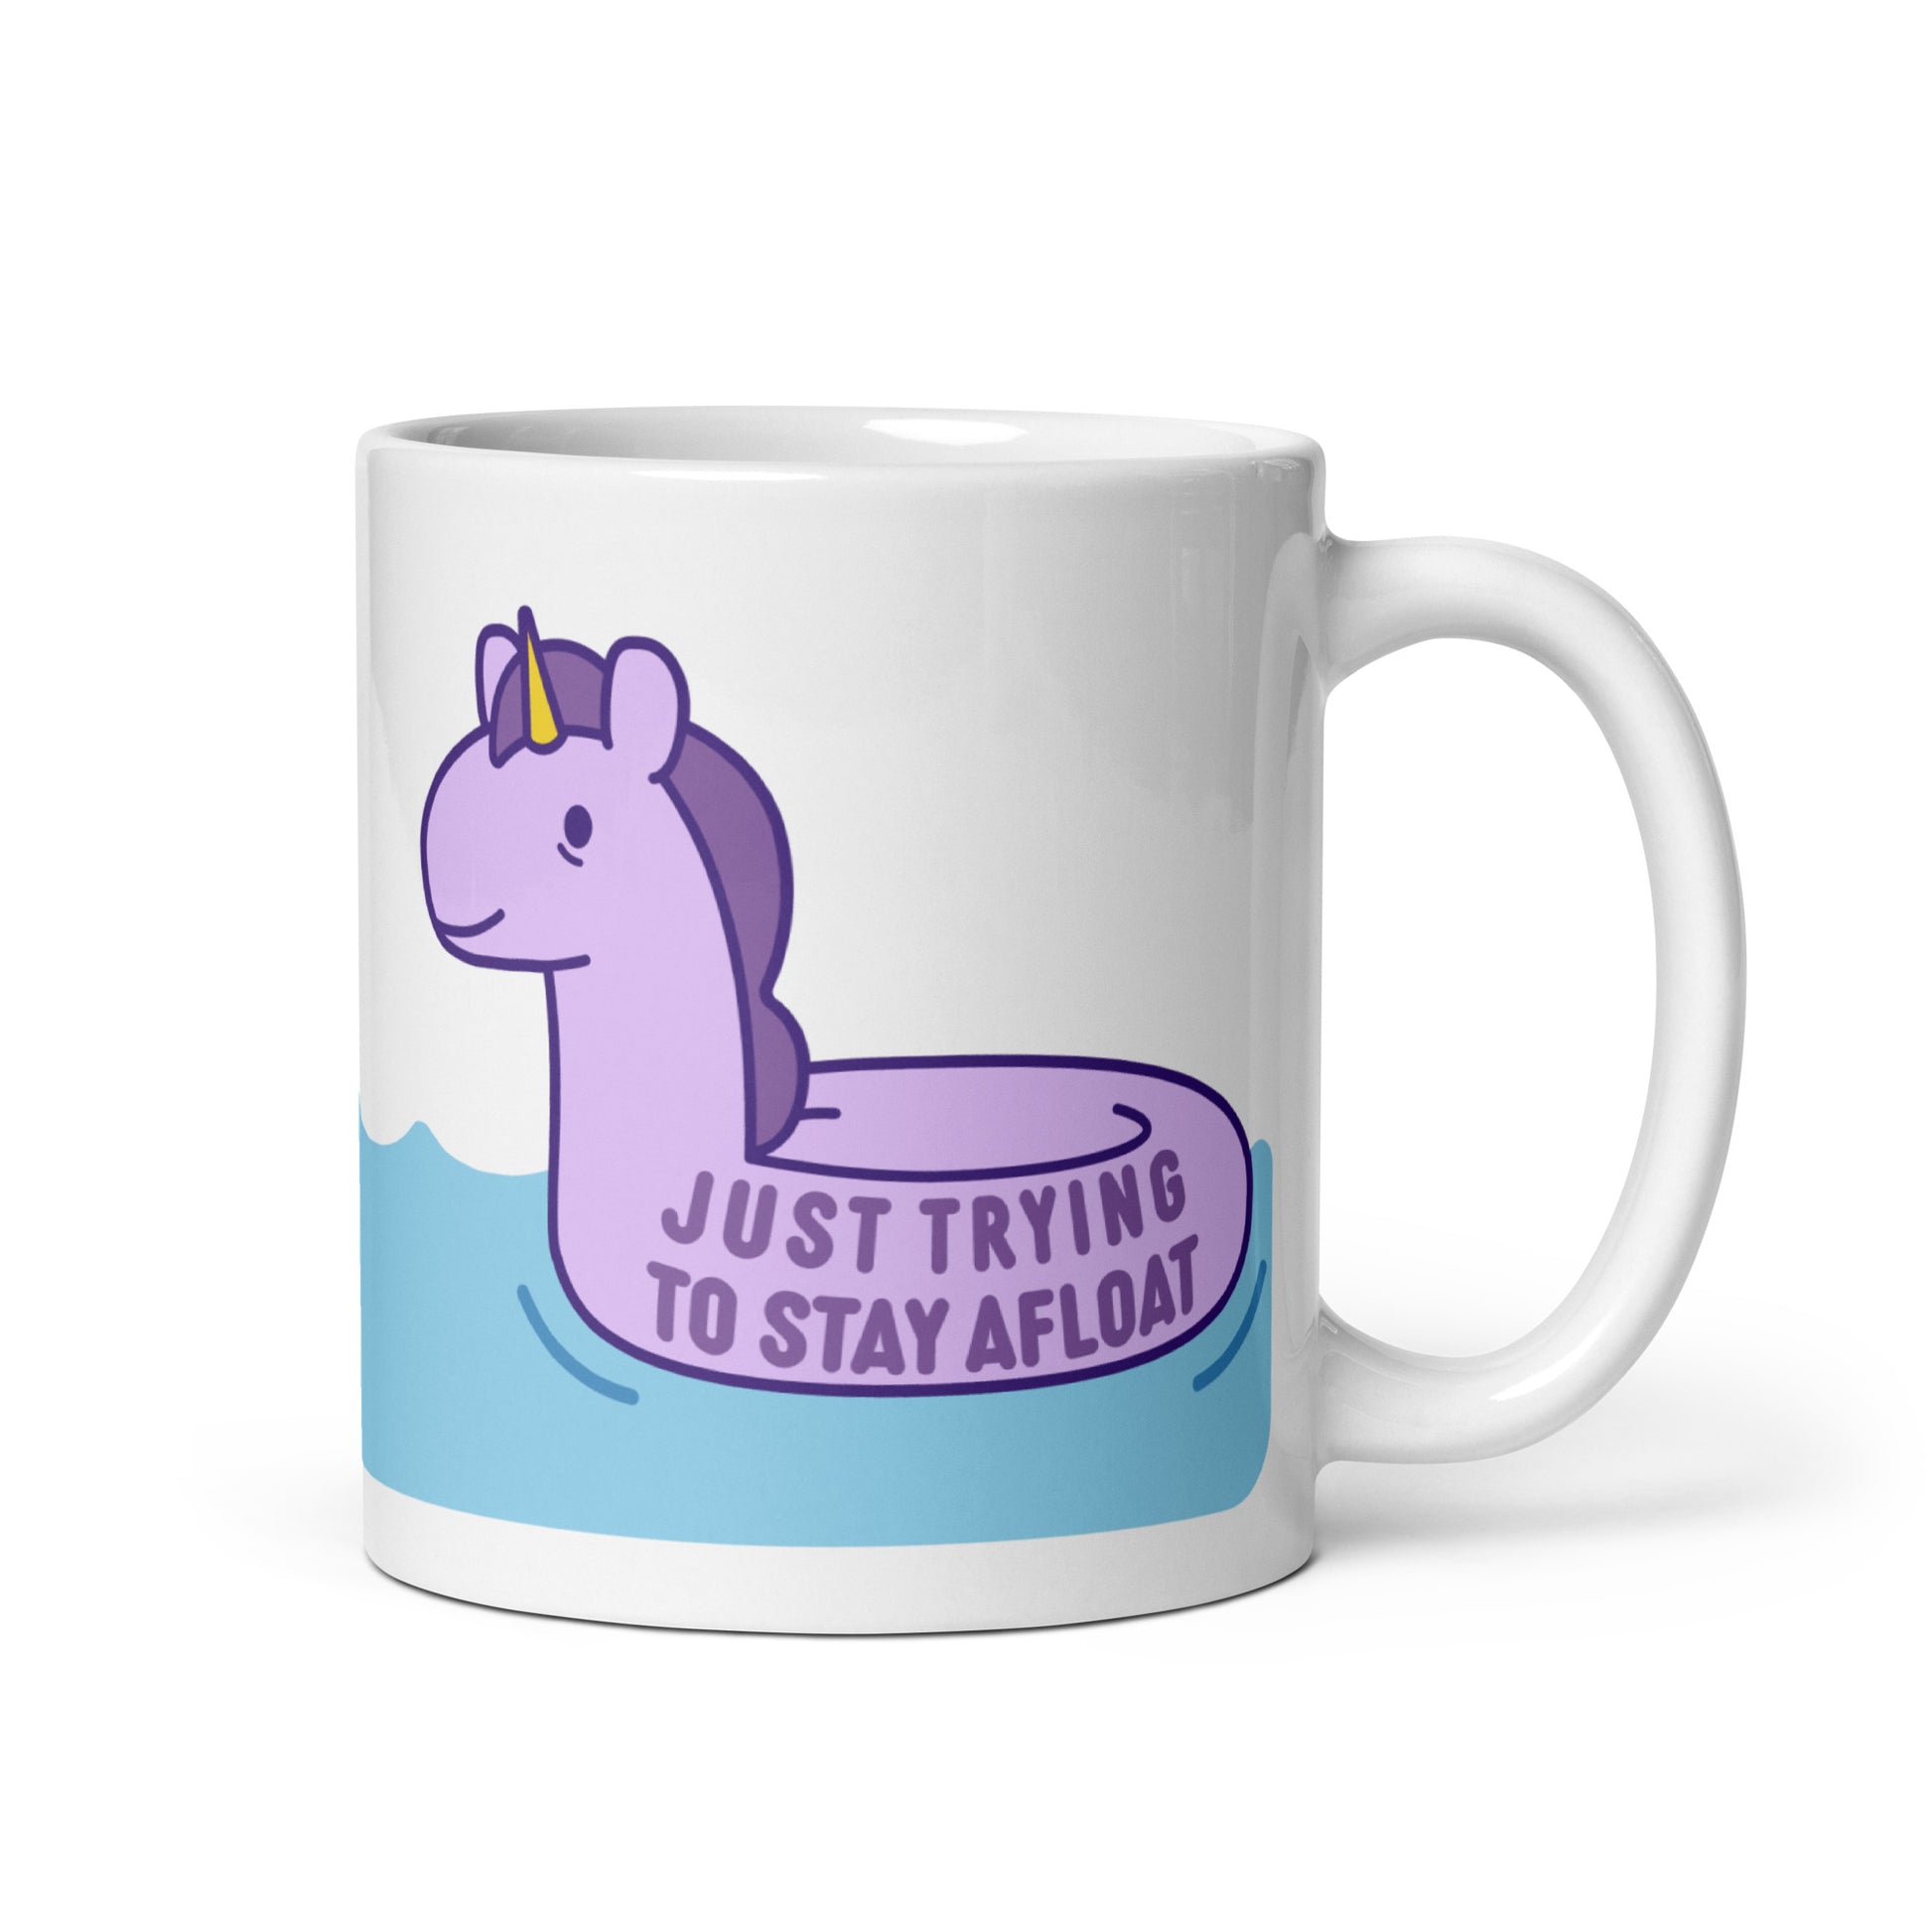 A white 11oz ceramic mug with a purple unicorn pool float floating on water and text reading "Just trying to stay afloat"